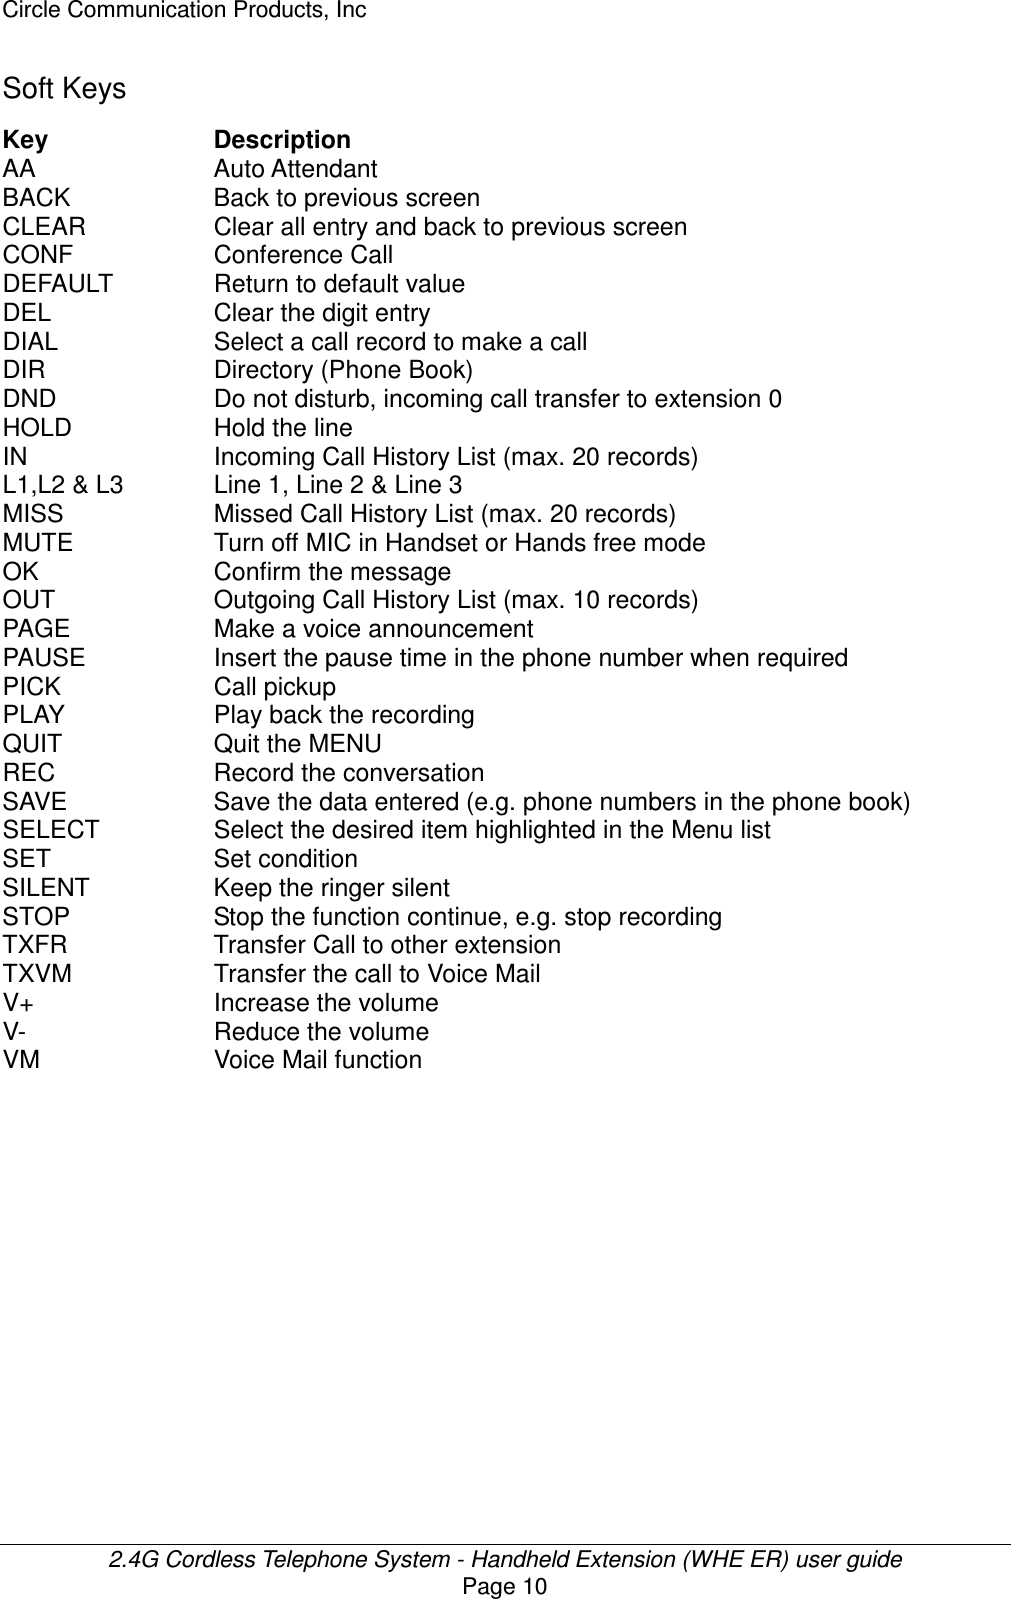 Circle Communication Products, Inc  2.4G Cordless Telephone System - Handheld Extension (WHE ER) user guide Page 10 Soft Keys Key  Description AA  Auto Attendant   BACK  Back to previous screen CLEAR  Clear all entry and back to previous screen CONF  Conference Call DEFAULT  Return to default value DEL  Clear the digit entry DIAL  Select a call record to make a call DIR  Directory (Phone Book) DND  Do not disturb, incoming call transfer to extension 0 HOLD  Hold the line IN  Incoming Call History List (max. 20 records) L1,L2 &amp; L3  Line 1, Line 2 &amp; Line 3 MISS  Missed Call History List (max. 20 records) MUTE  Turn off MIC in Handset or Hands free mode OK  Confirm the message   OUT  Outgoing Call History List (max. 10 records) PAGE  Make a voice announcement PAUSE  Insert the pause time in the phone number when required PICK  Call pickup PLAY  Play back the recording QUIT  Quit the MENU REC  Record the conversation SAVE  Save the data entered (e.g. phone numbers in the phone book) SELECT  Select the desired item highlighted in the Menu list SET  Set condition SILENT  Keep the ringer silent STOP  Stop the function continue, e.g. stop recording TXFR  Transfer Call to other extension TXVM  Transfer the call to Voice Mail V+  Increase the volume V-  Reduce the volume VM  Voice Mail function  